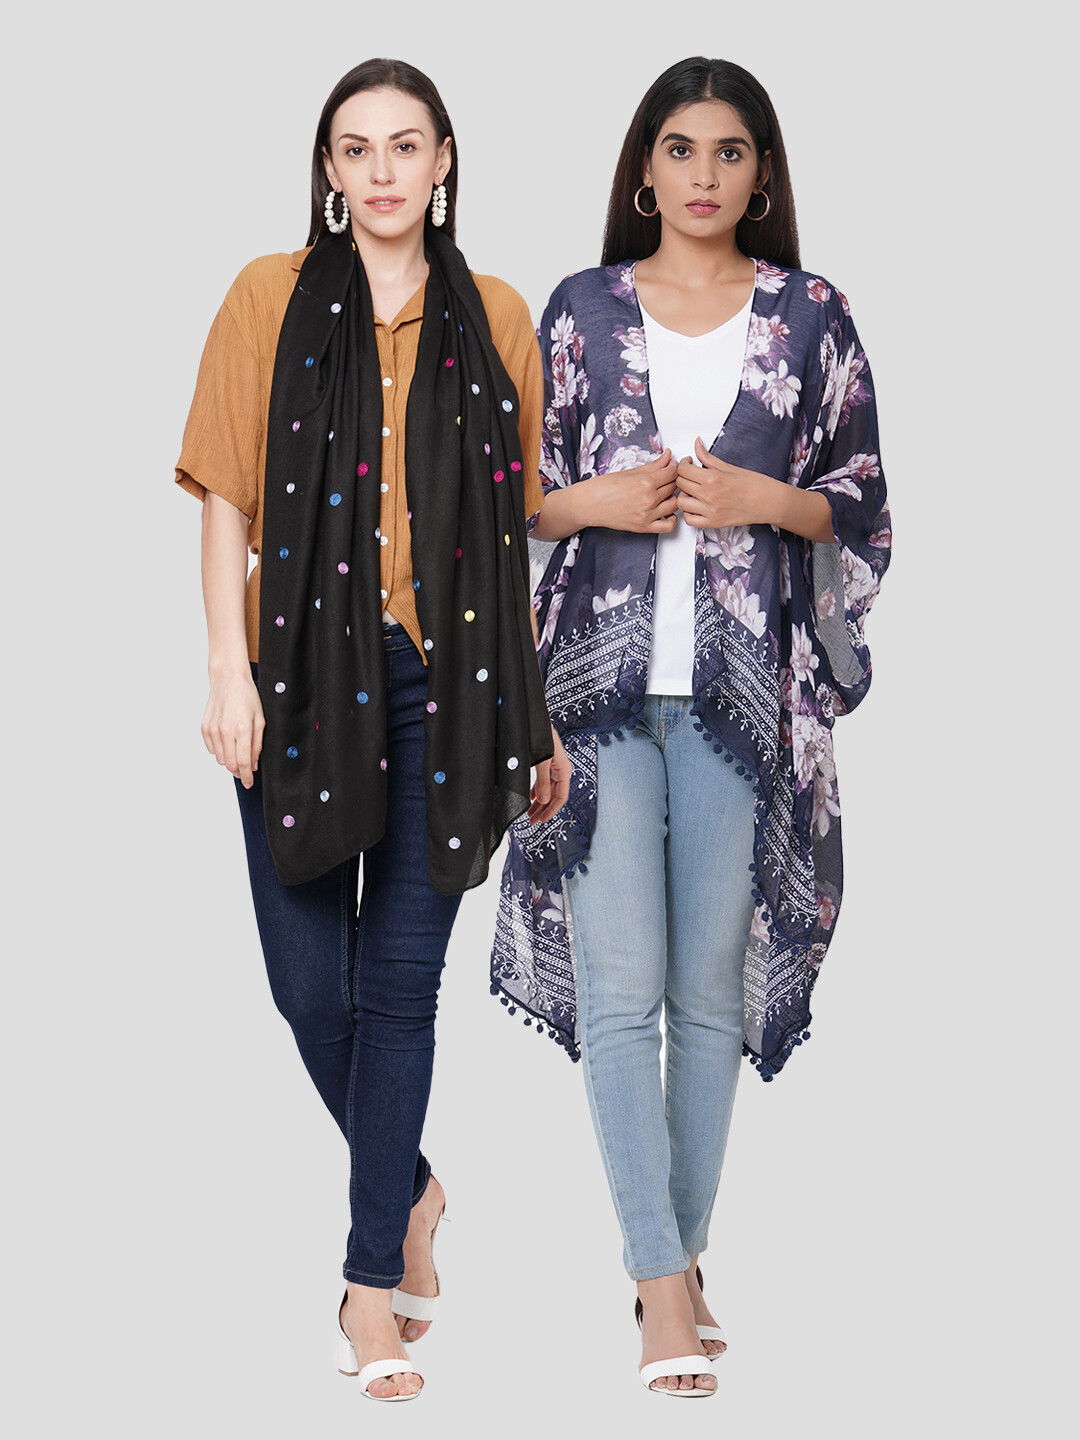 Stylist Printed Ponchos & embroidered Scarf - Combo offer